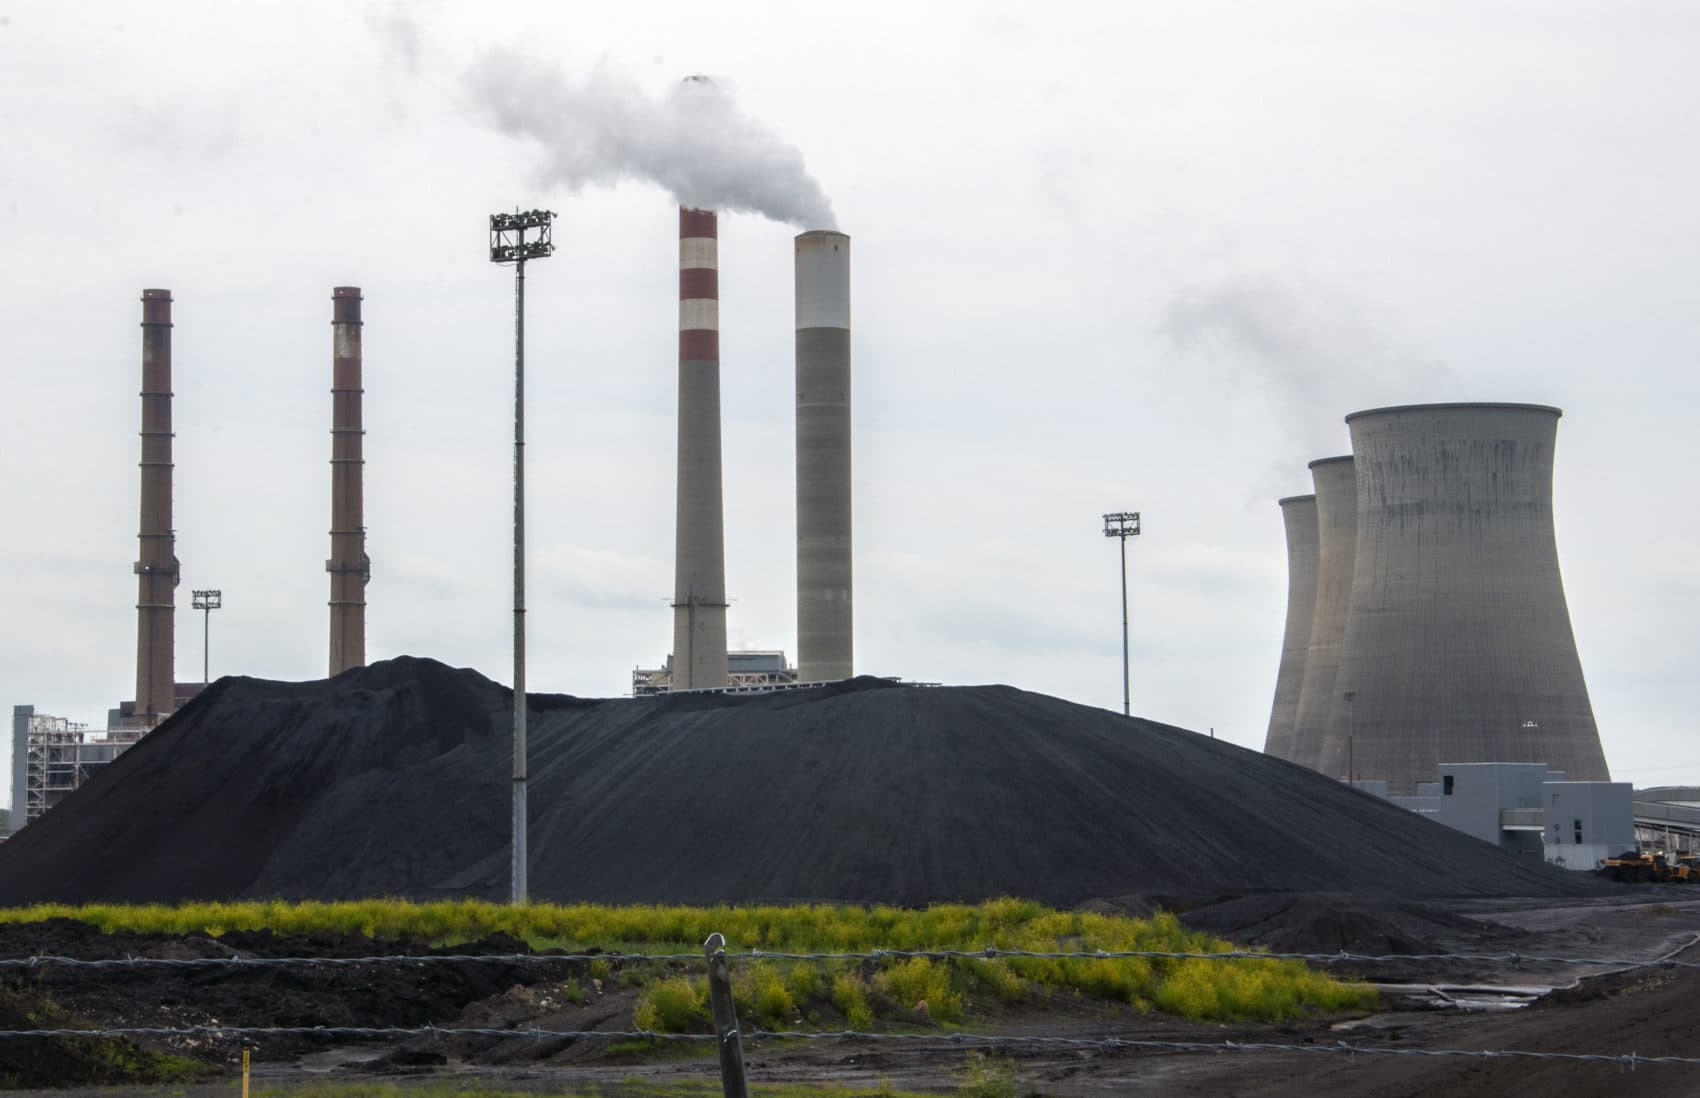 The Tennessee Valley Authority voted in 2019 to close the Paradise Fossil Plant in Muhlenberg County, Kentucky, despite objections from President Trump. (Chris Bentley/Here & Now)